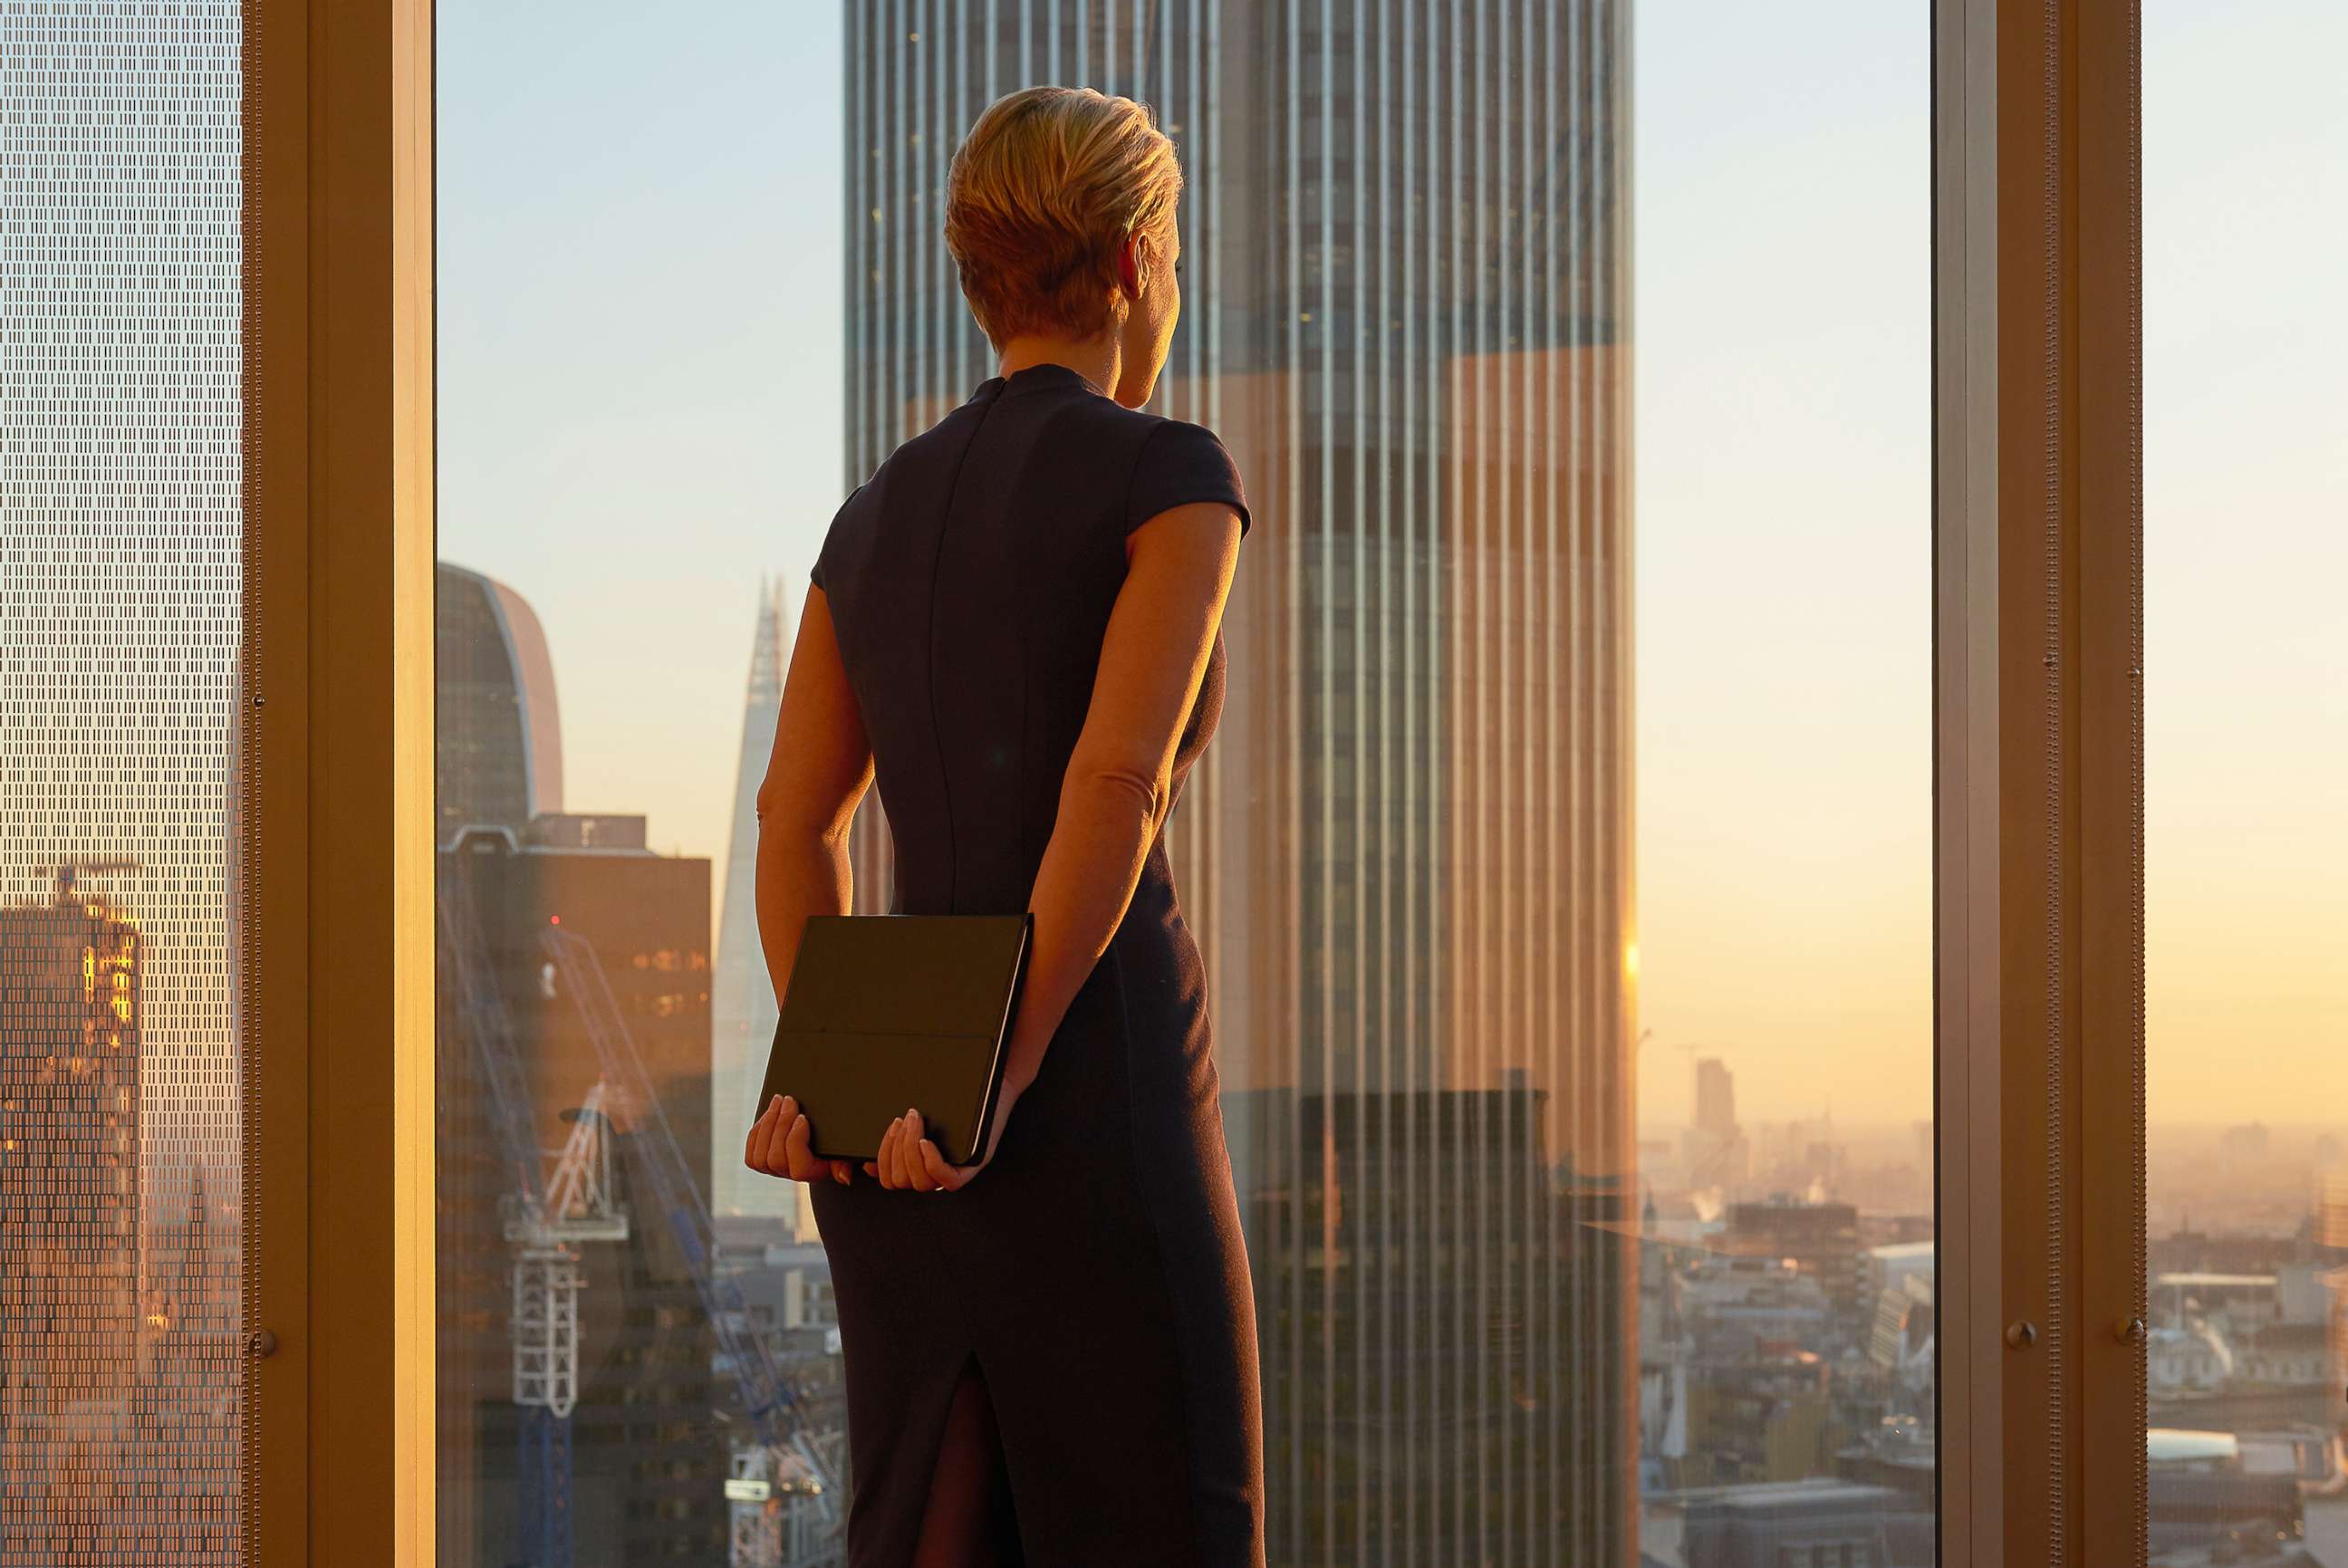 PHOTO: Woman in office standing at window.